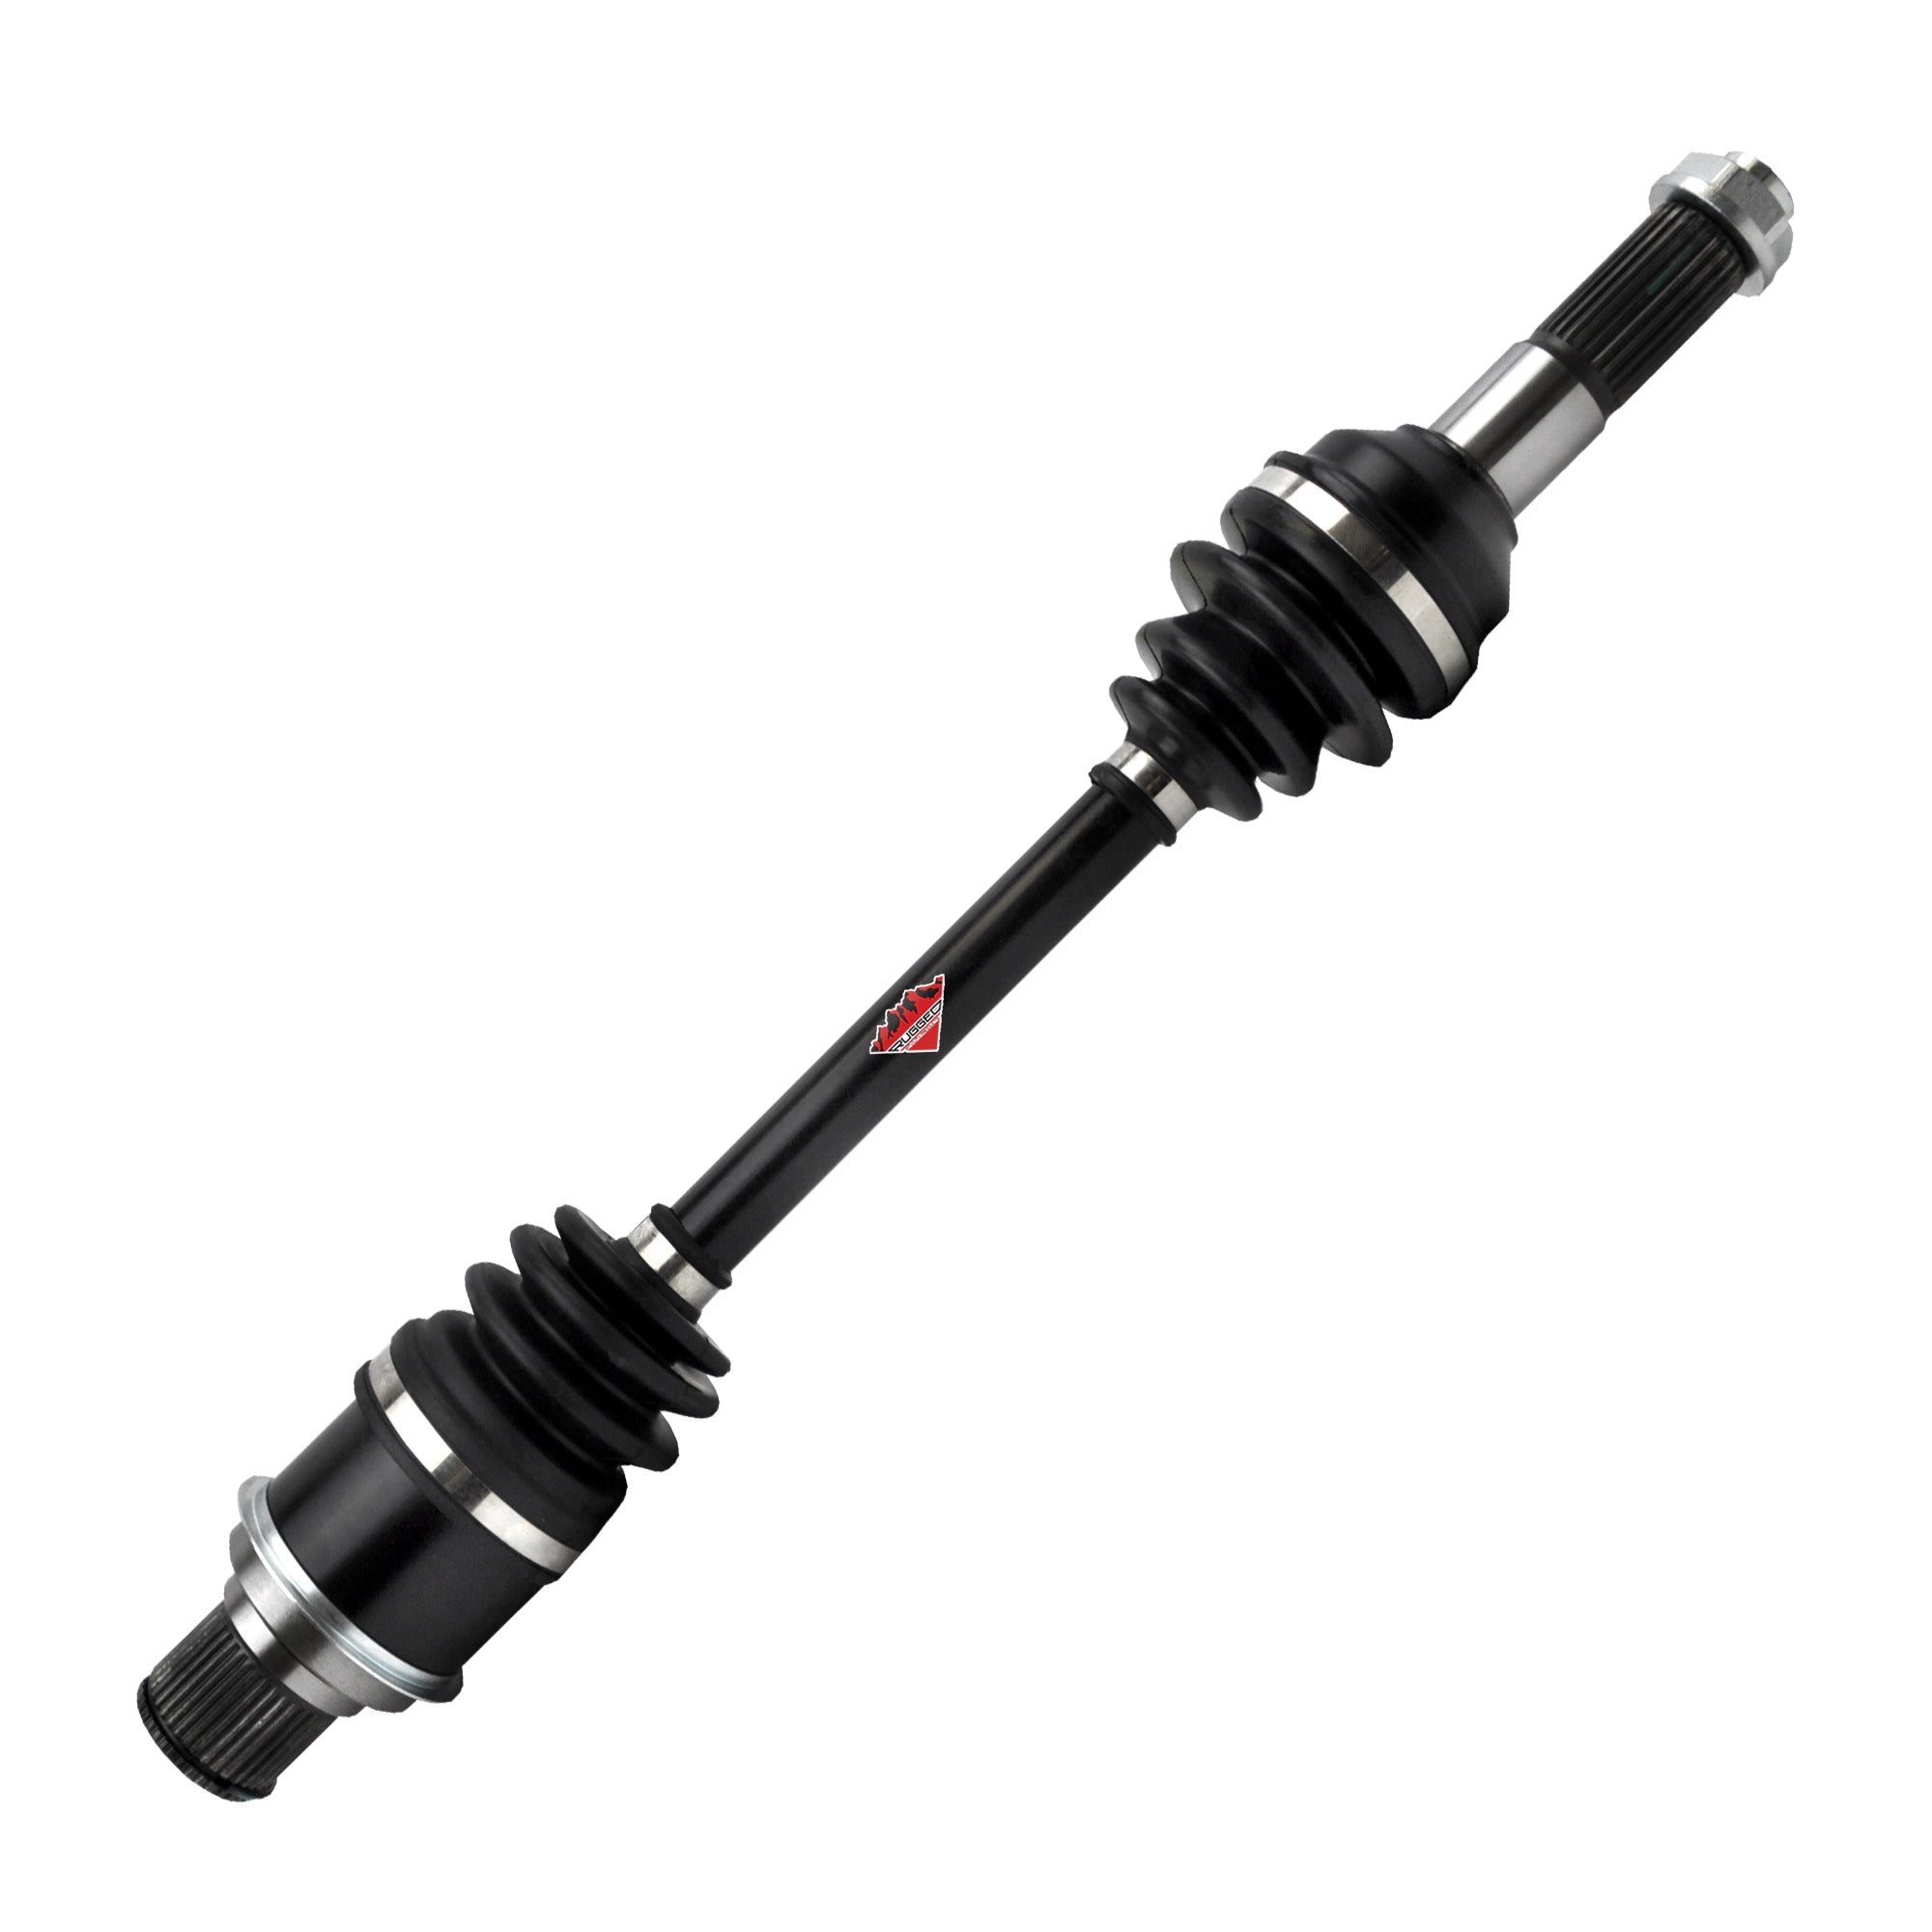 Performance Axle for Yamaha Grizzly 400 